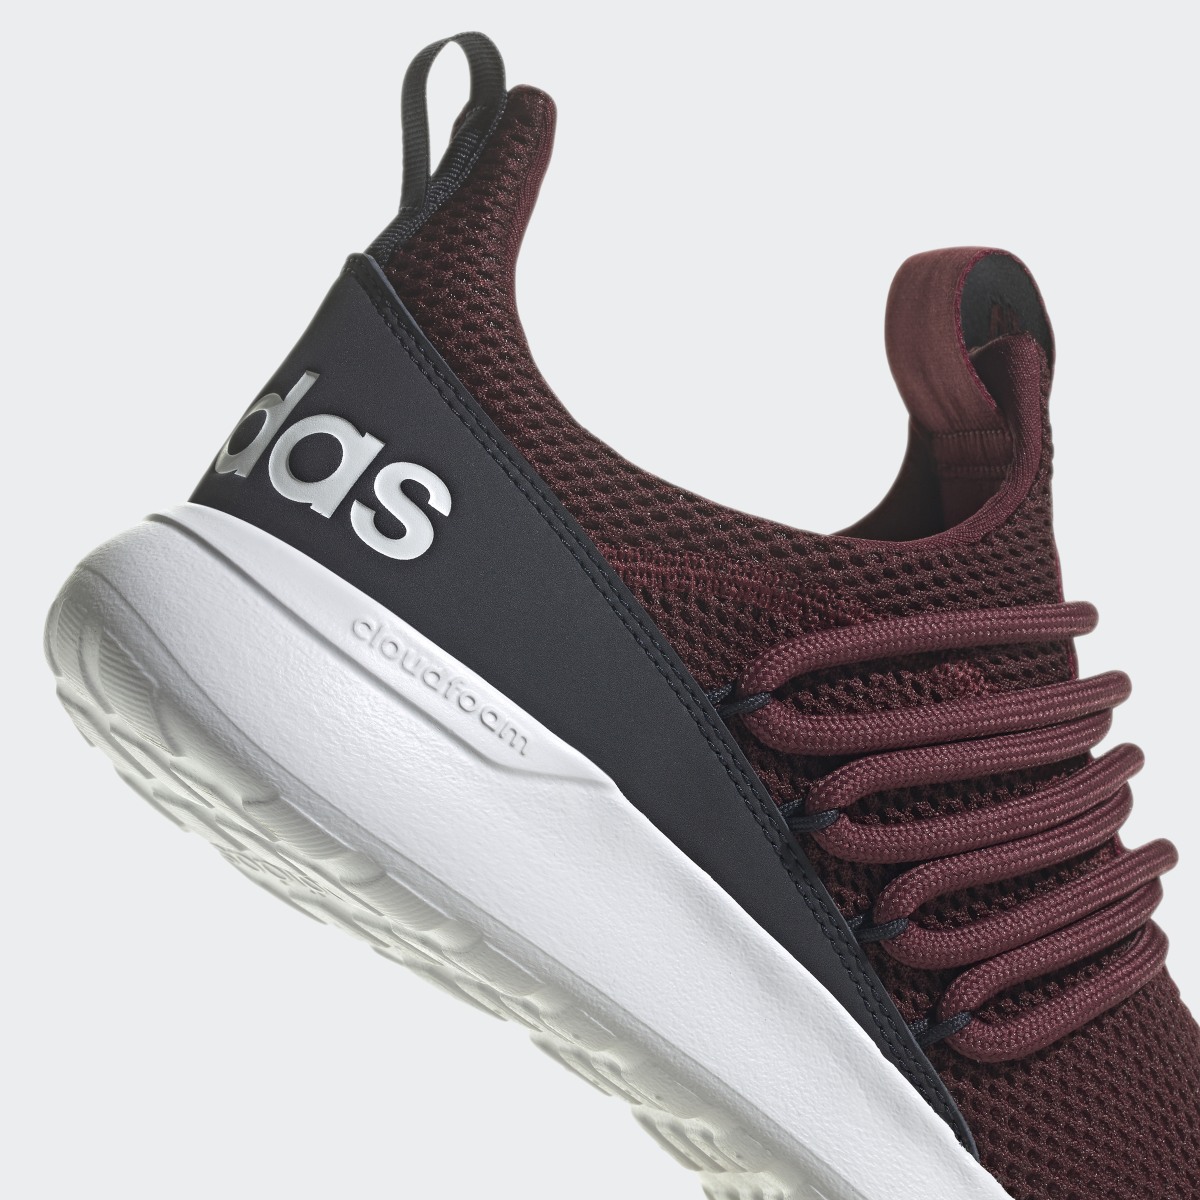 Adidas Lite Racer Adapt 3.0 Shoes. 9